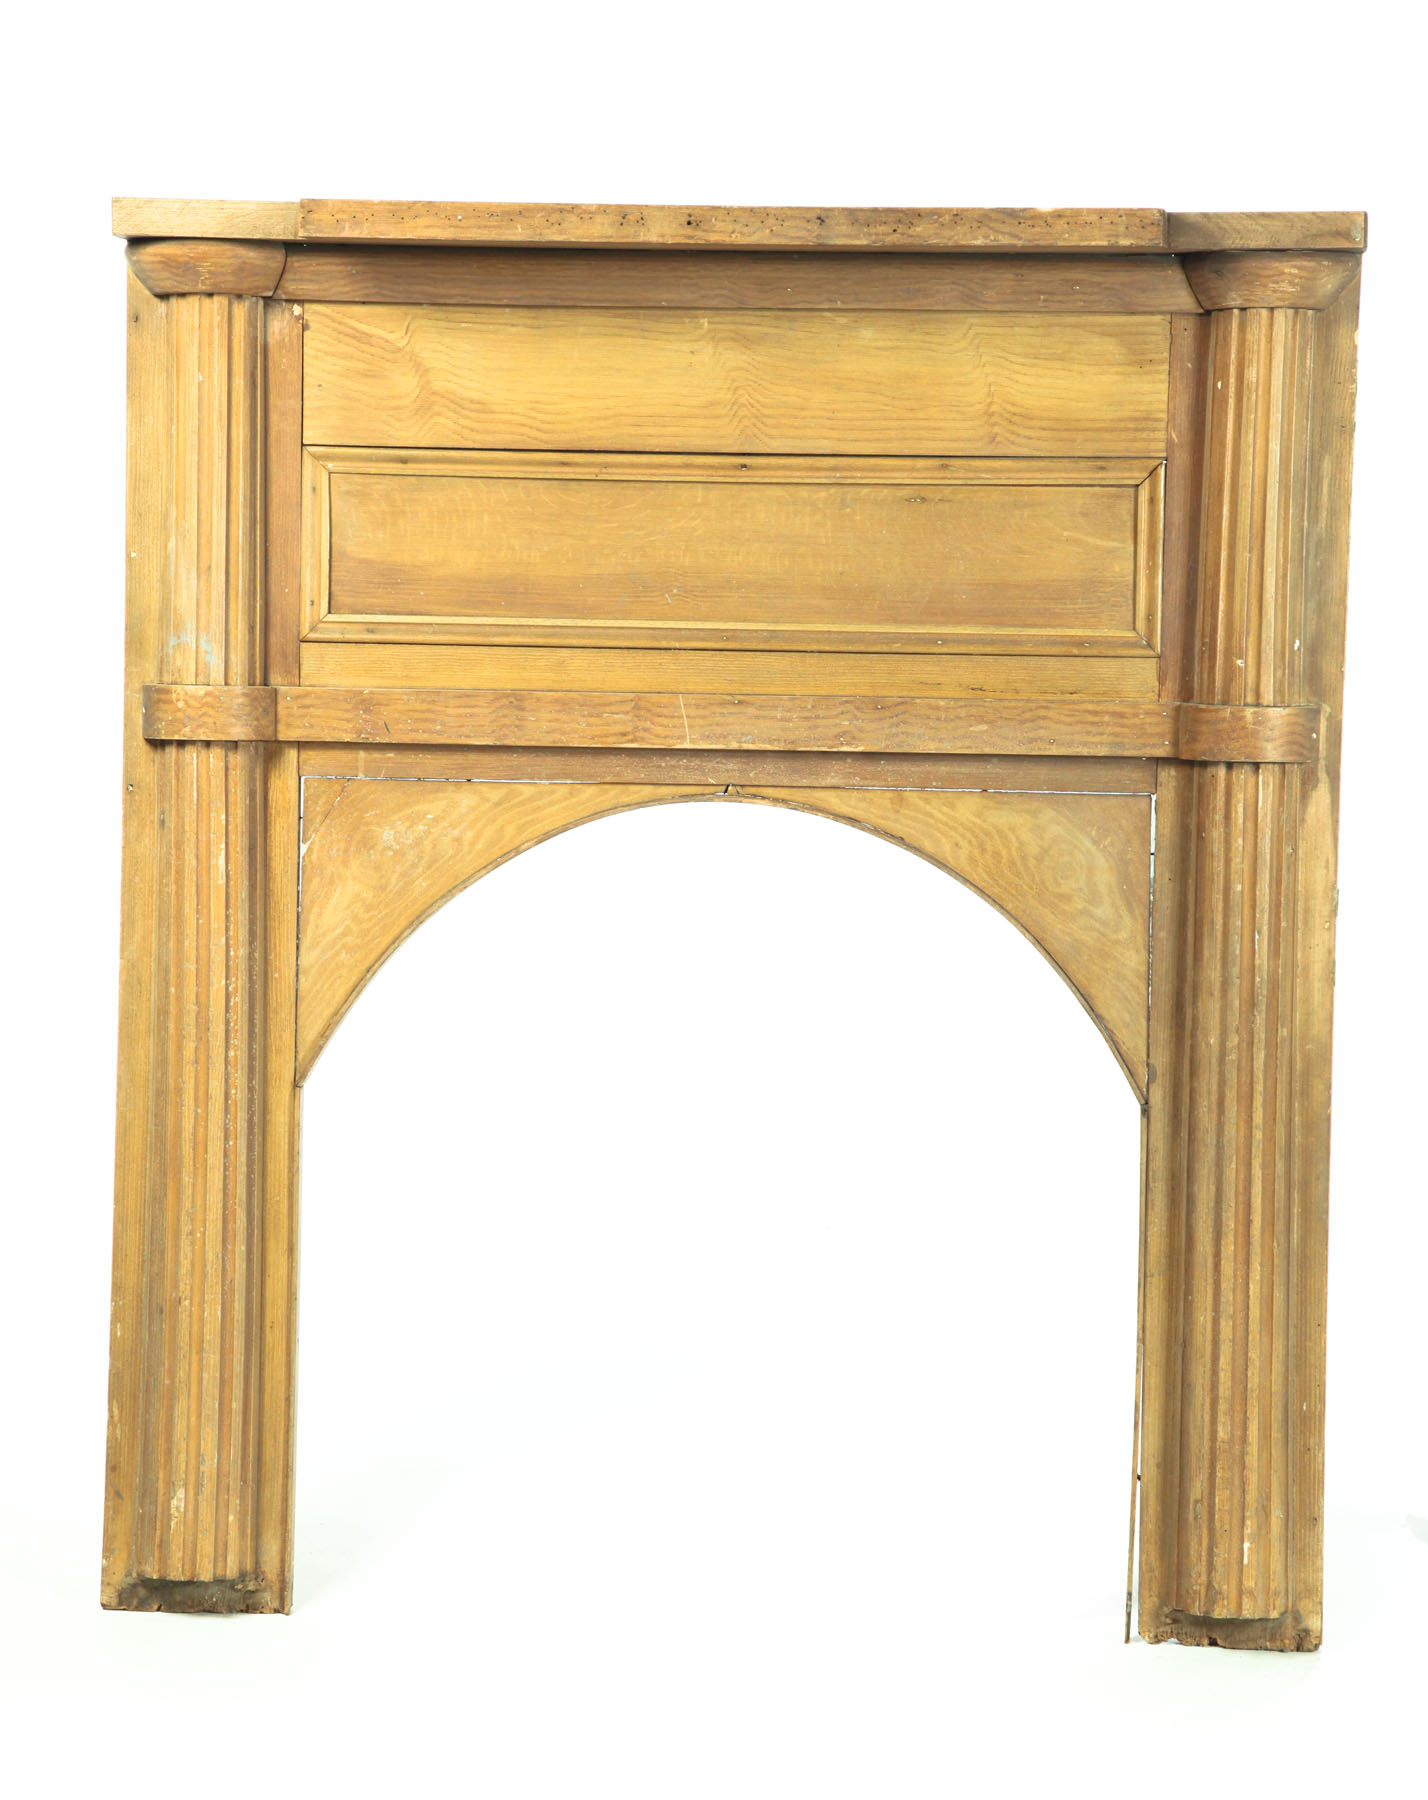 DECORATED MANTEL American mid 1238d4